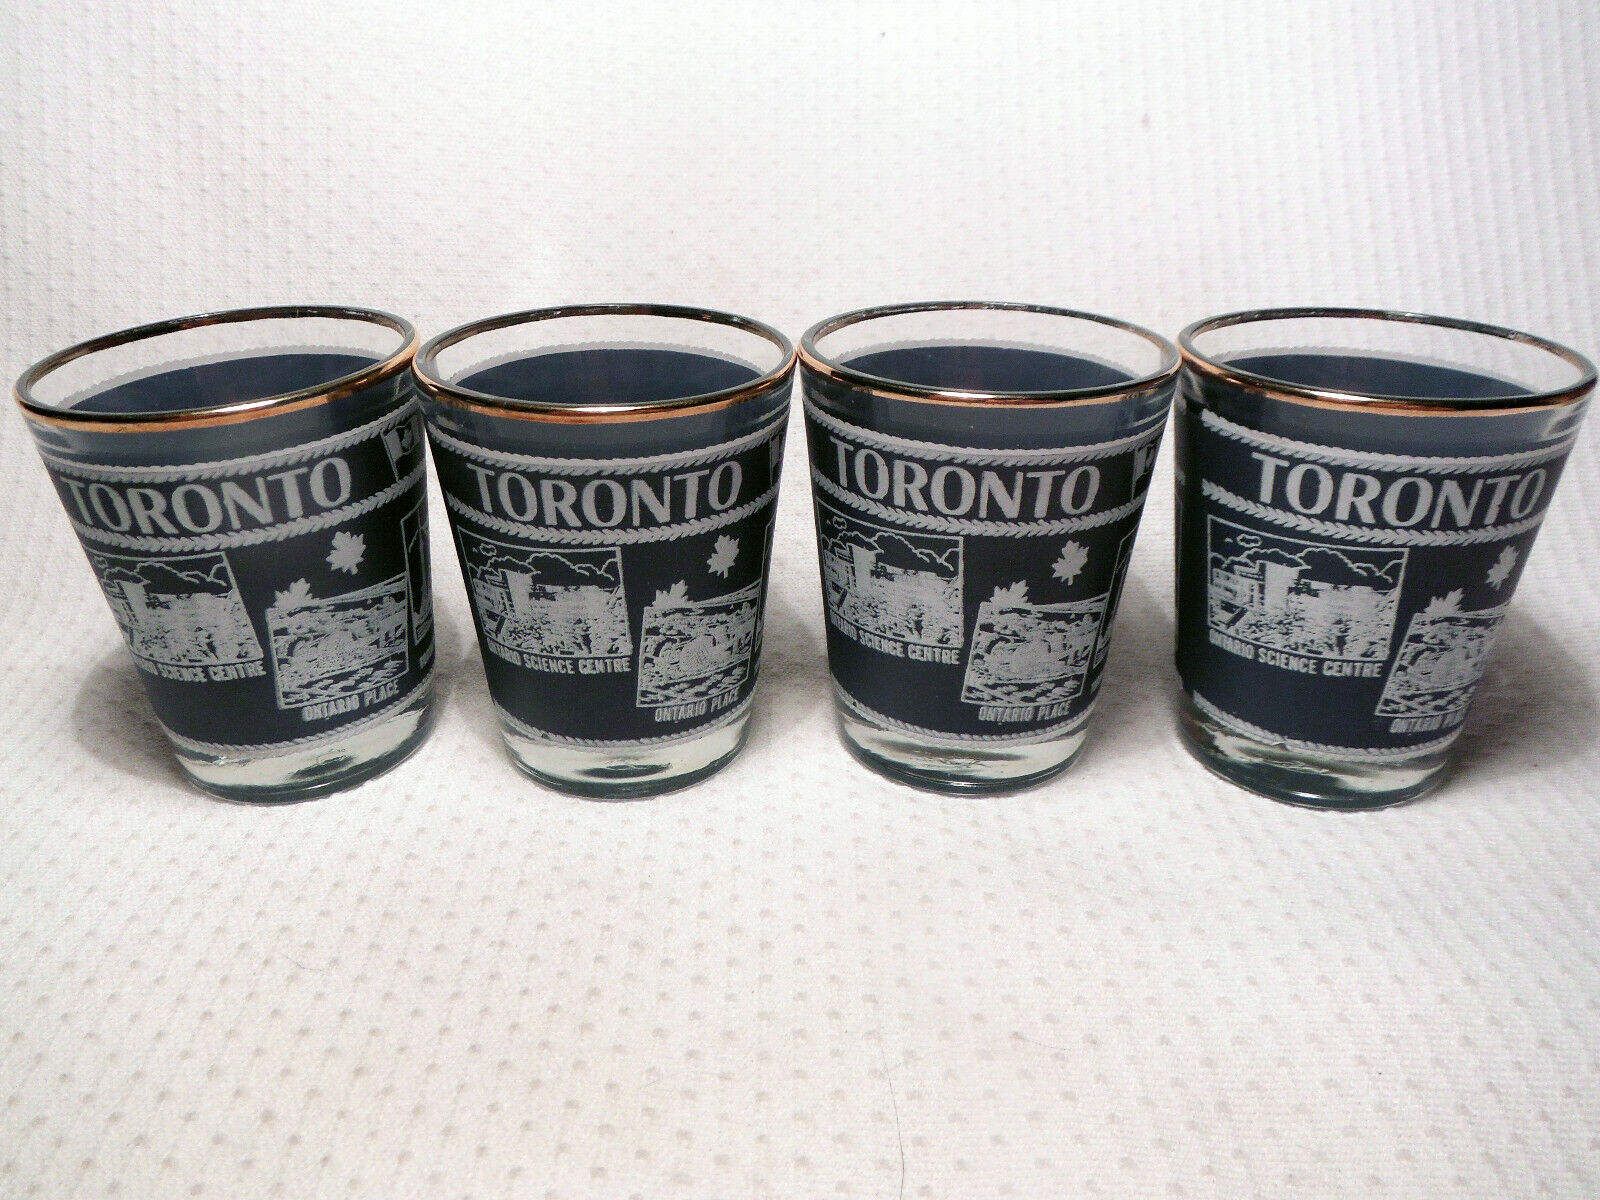 CANADA SHOT GLASSES ~ 4 VINTAGE GLASSES BY DOMINION GLASS.